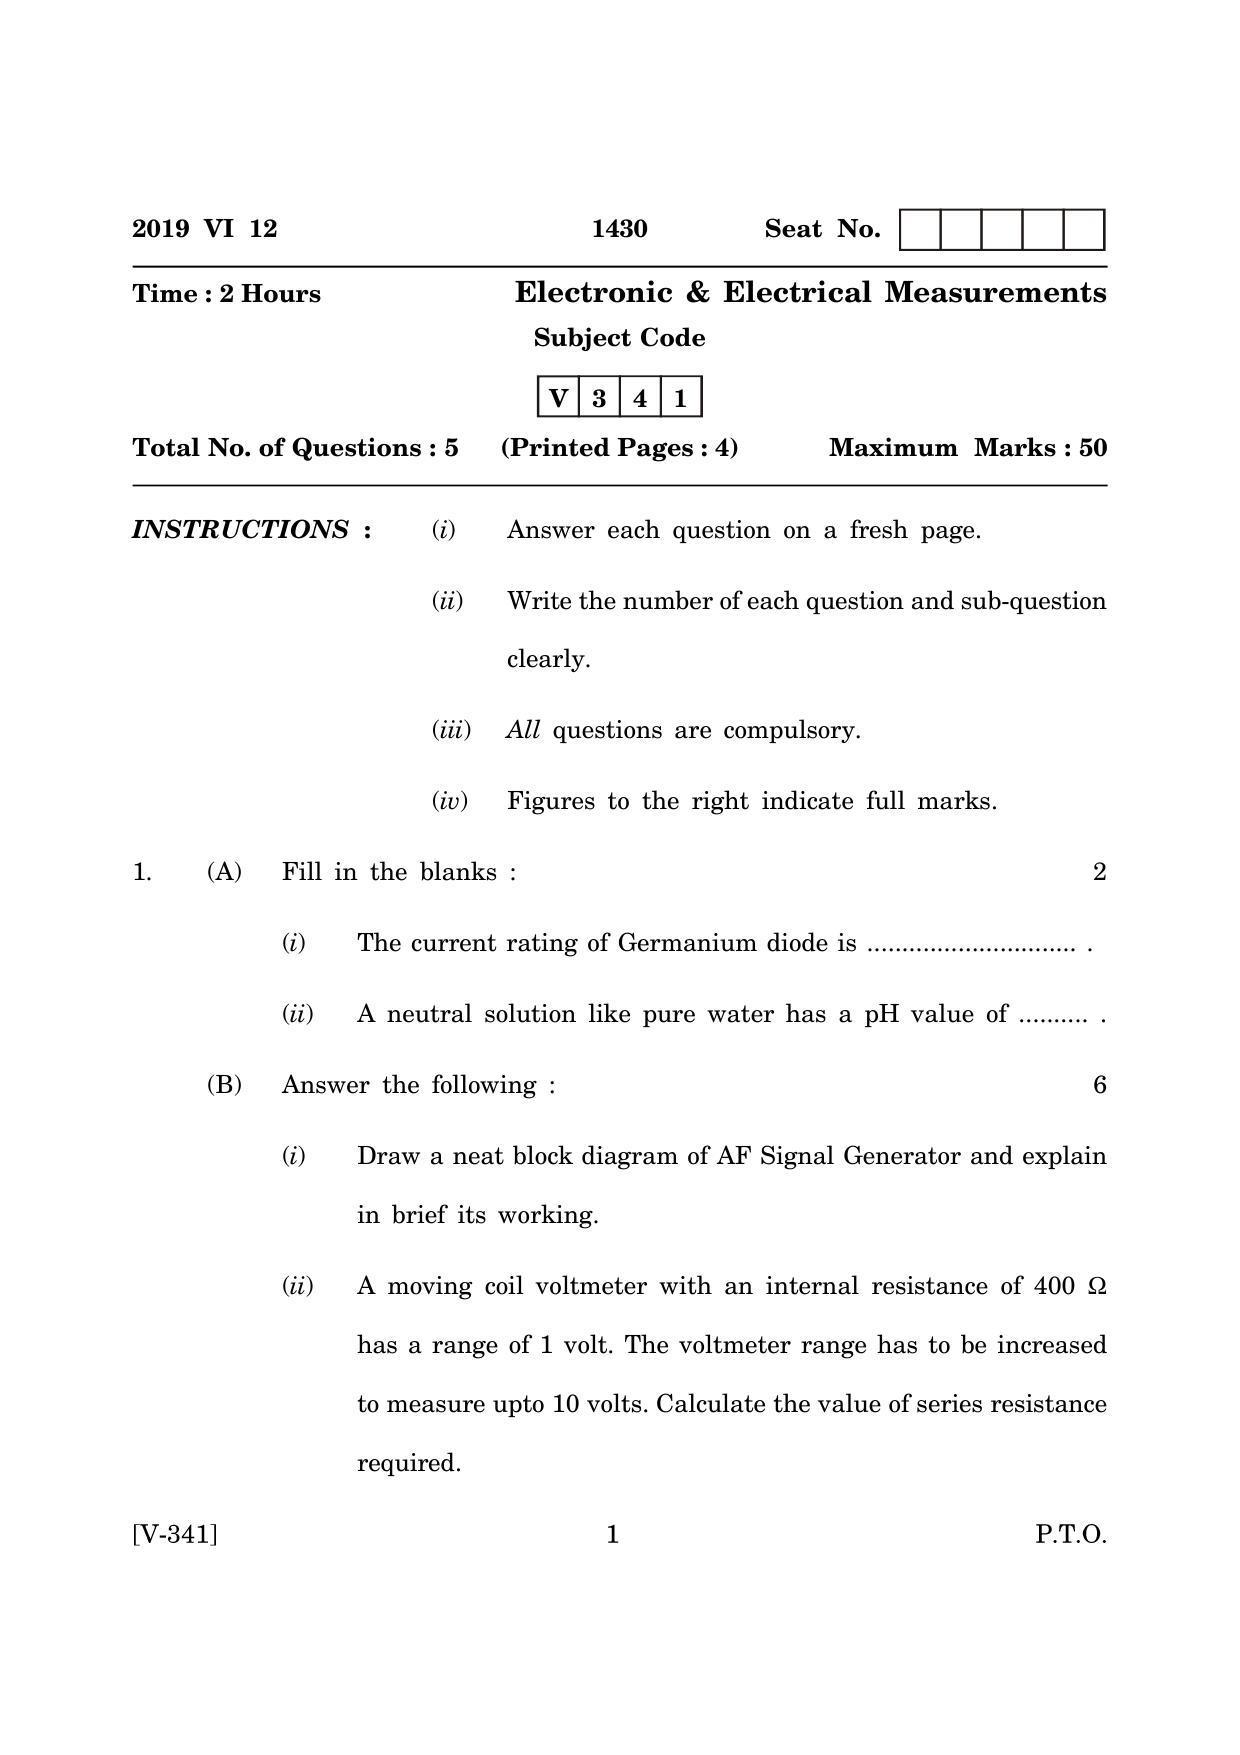 Goa Board Class 12 Electronic and Electrical Measurements  2019 (June 2019) Question Paper - Page 1